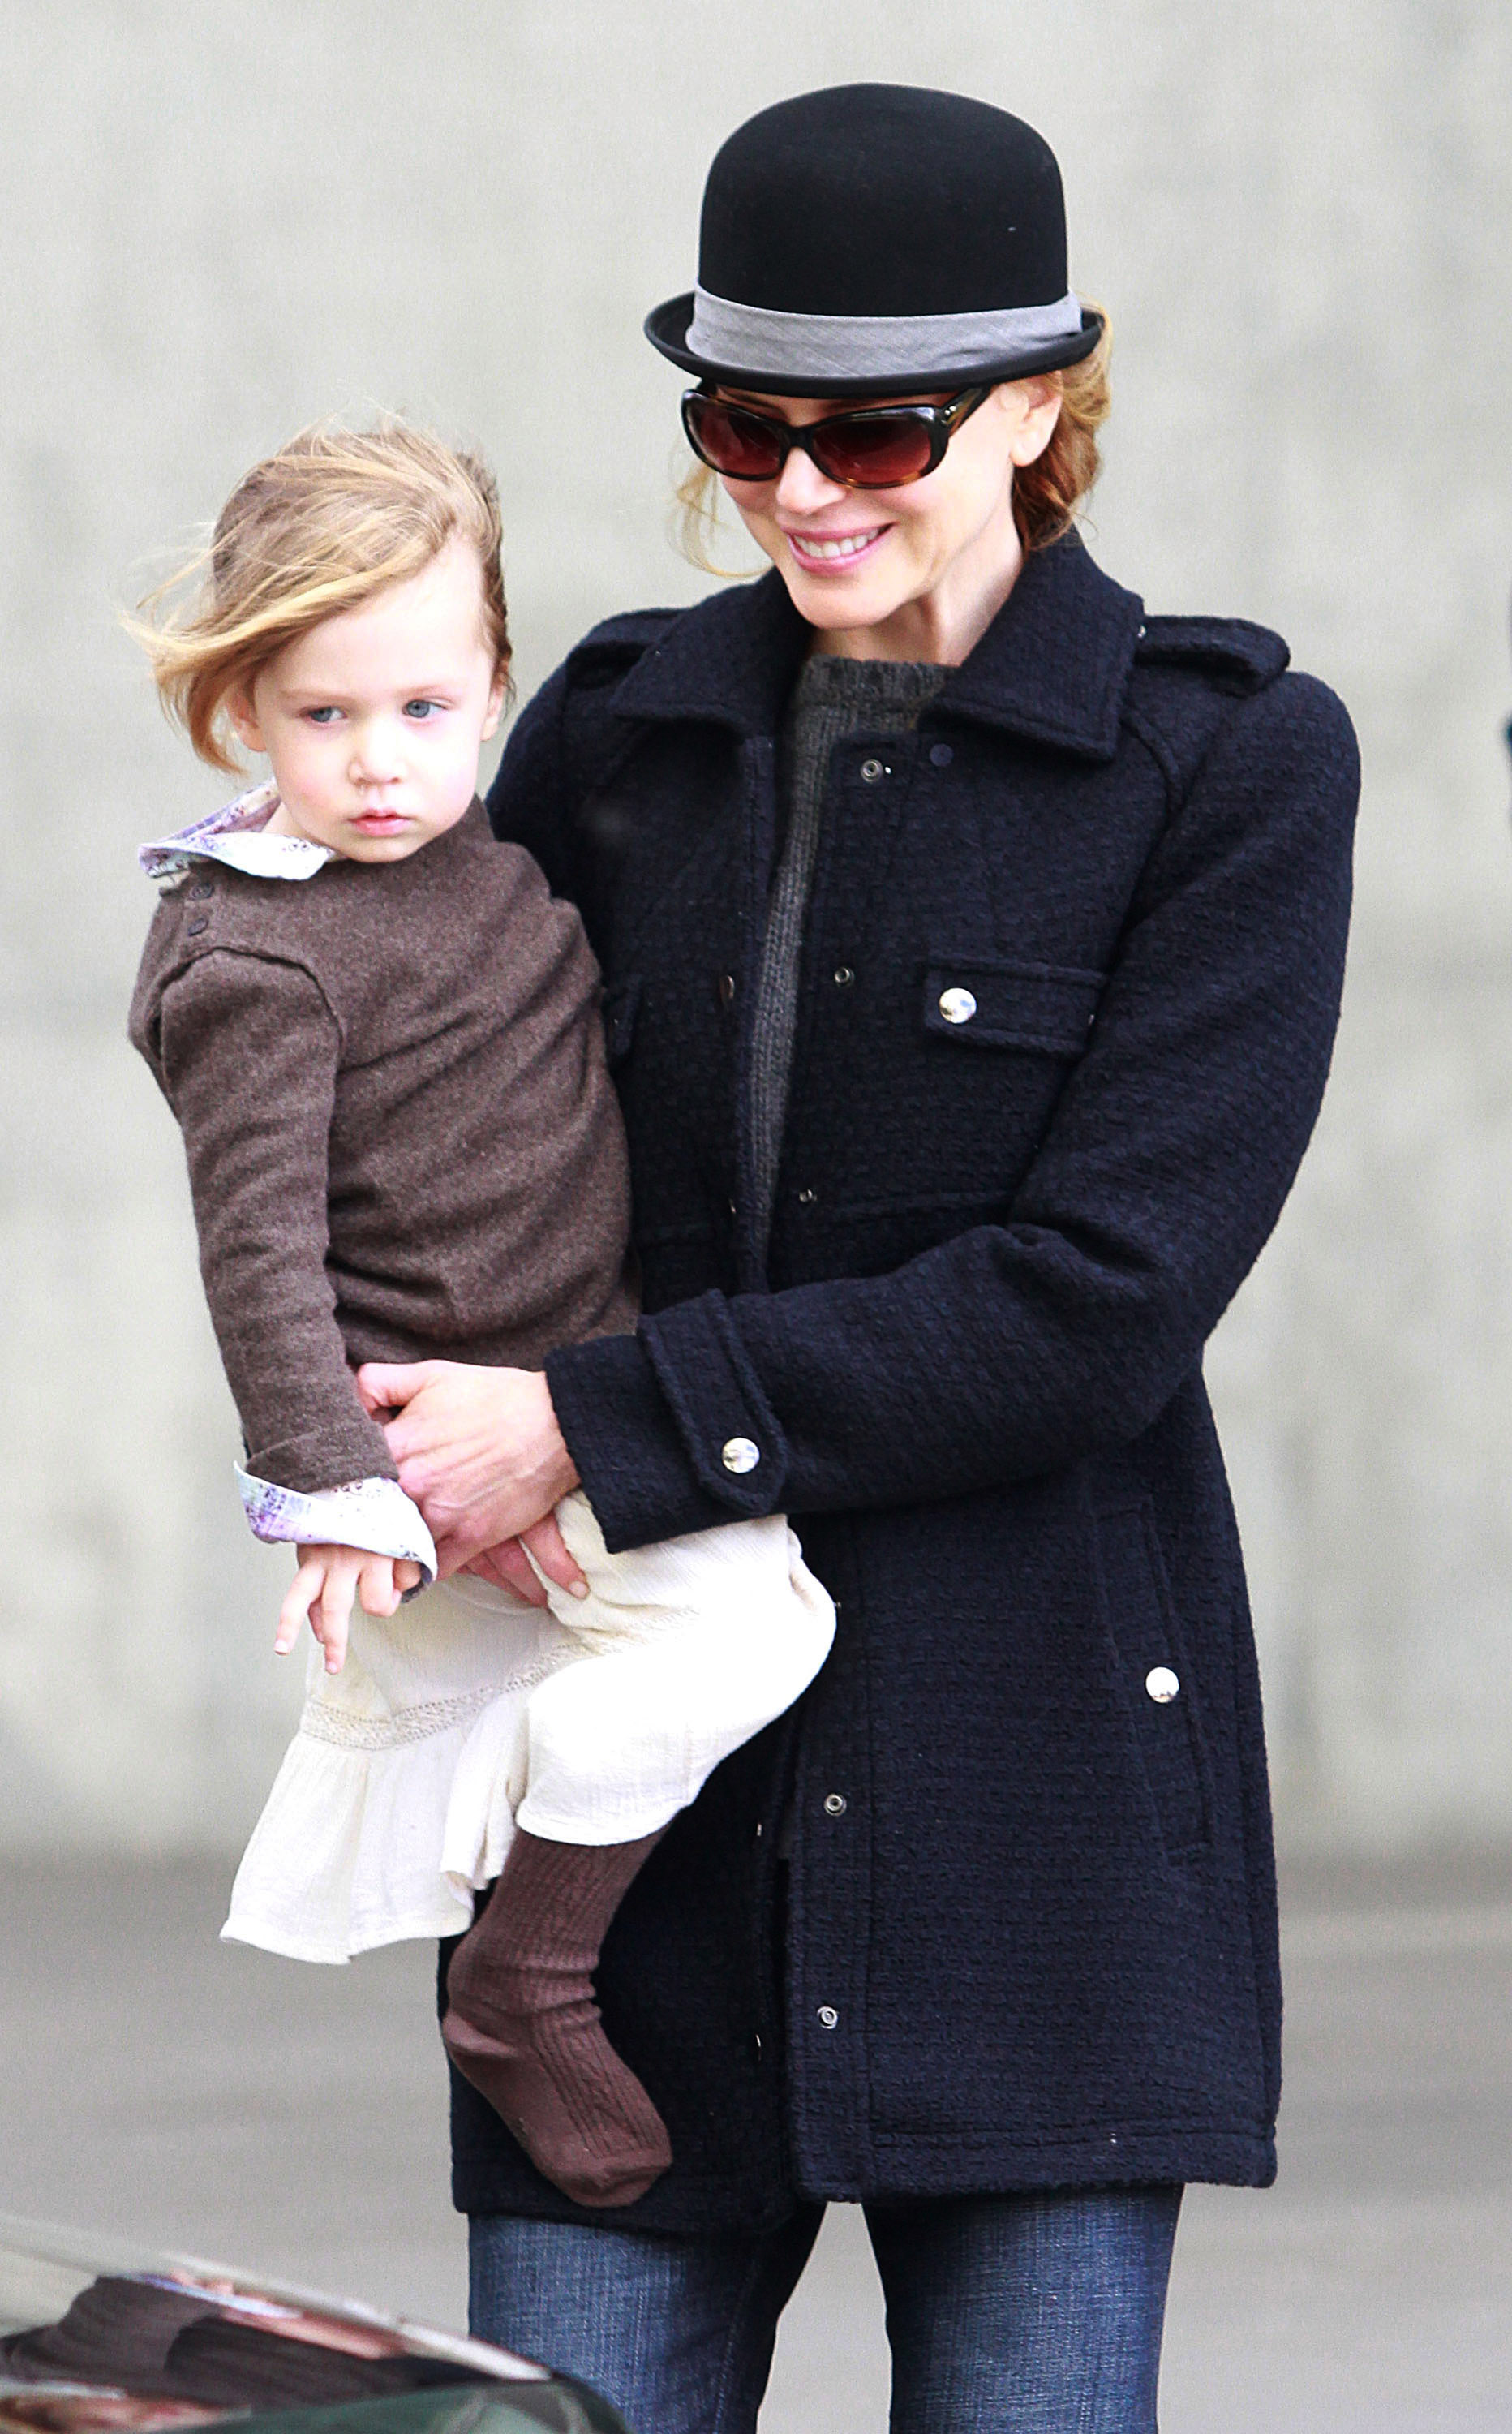 Sunday Kidman-Urban and Nicole Kidman spotted in New York City, 2010 | Source: Getty Images